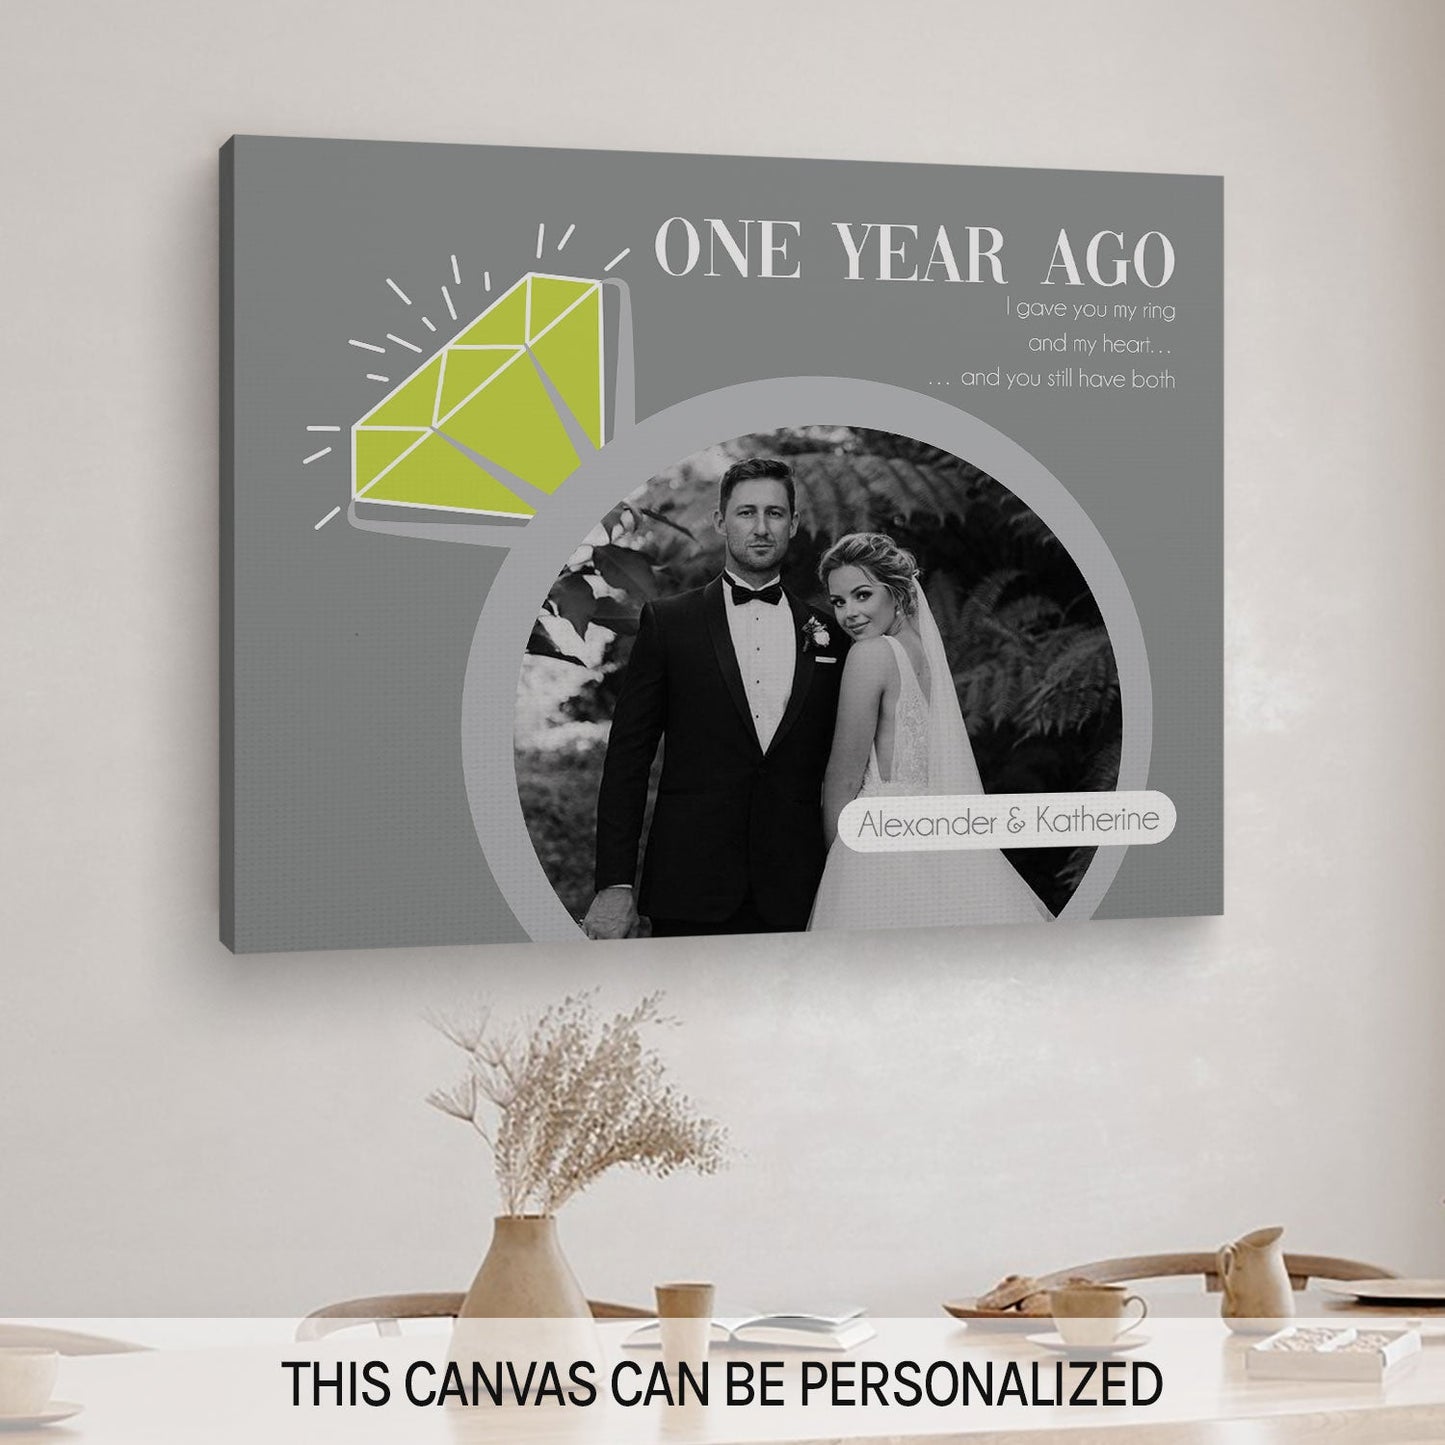 One Year Ago - Personalized 1 Year Anniversary gift For Husband or Wife - Custom Canvas Print - MyMindfulGifts